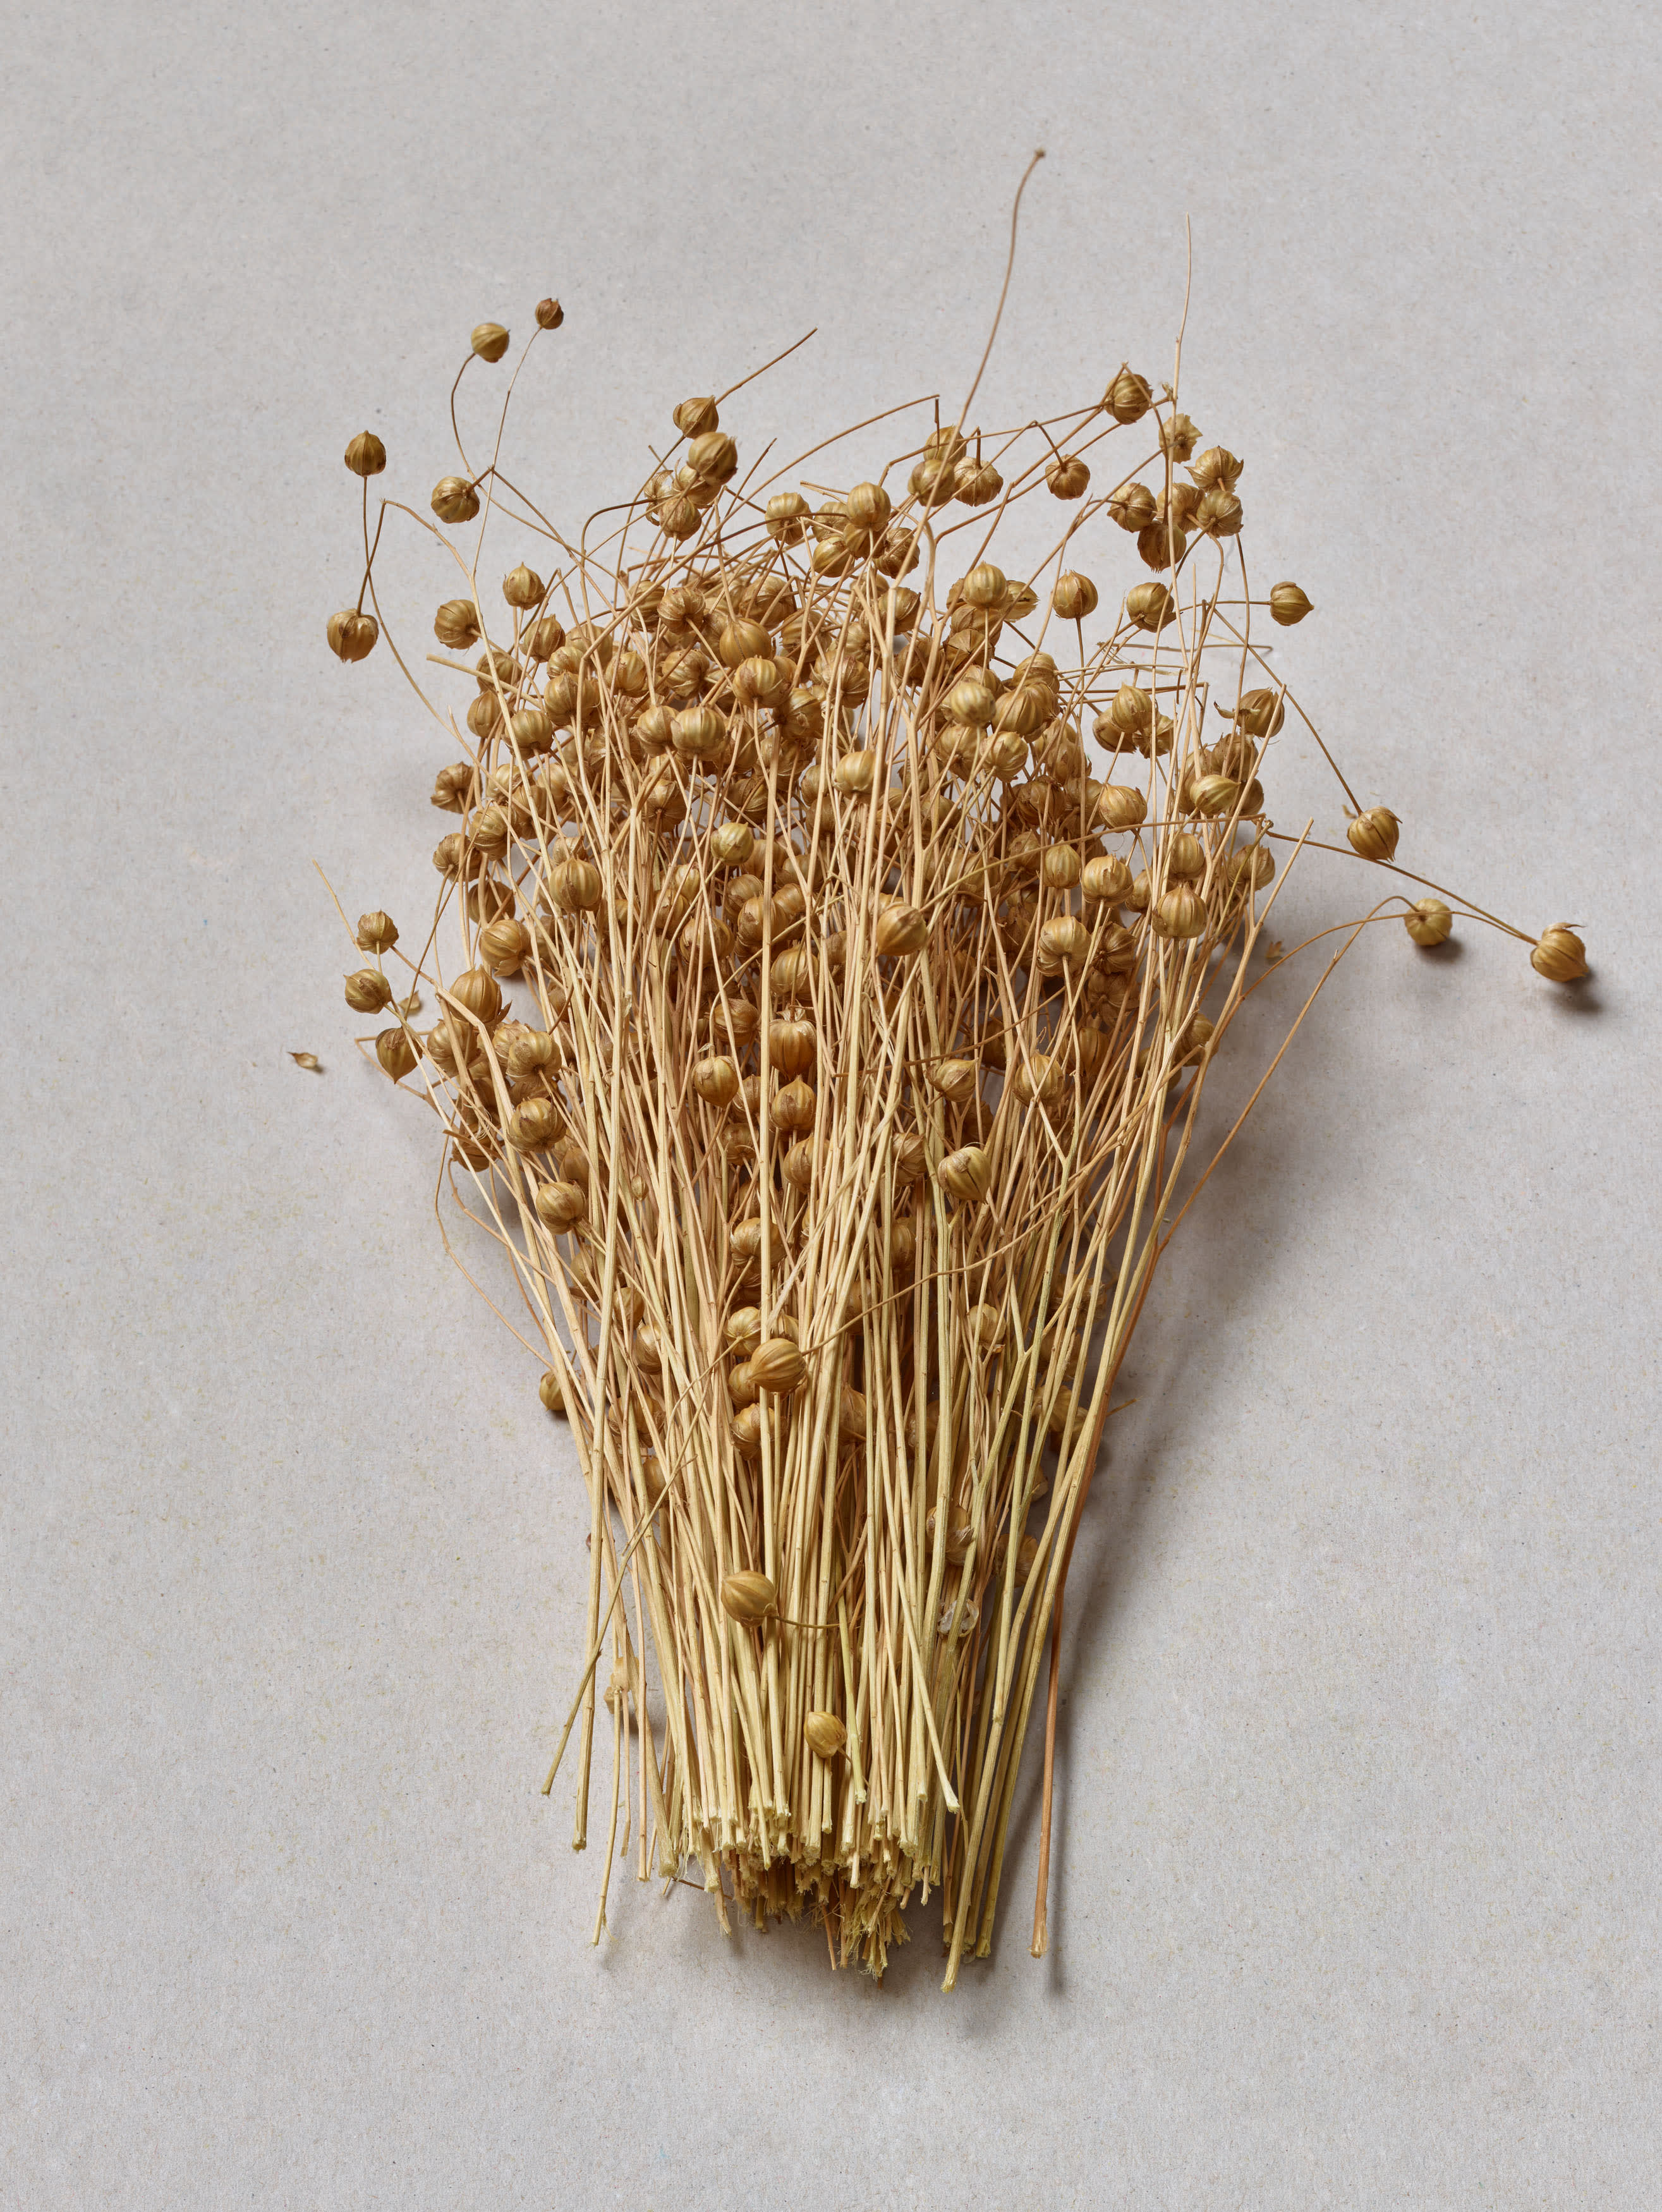 The linseed oil used in our production comes from pressed flax seeds from the flax plant.